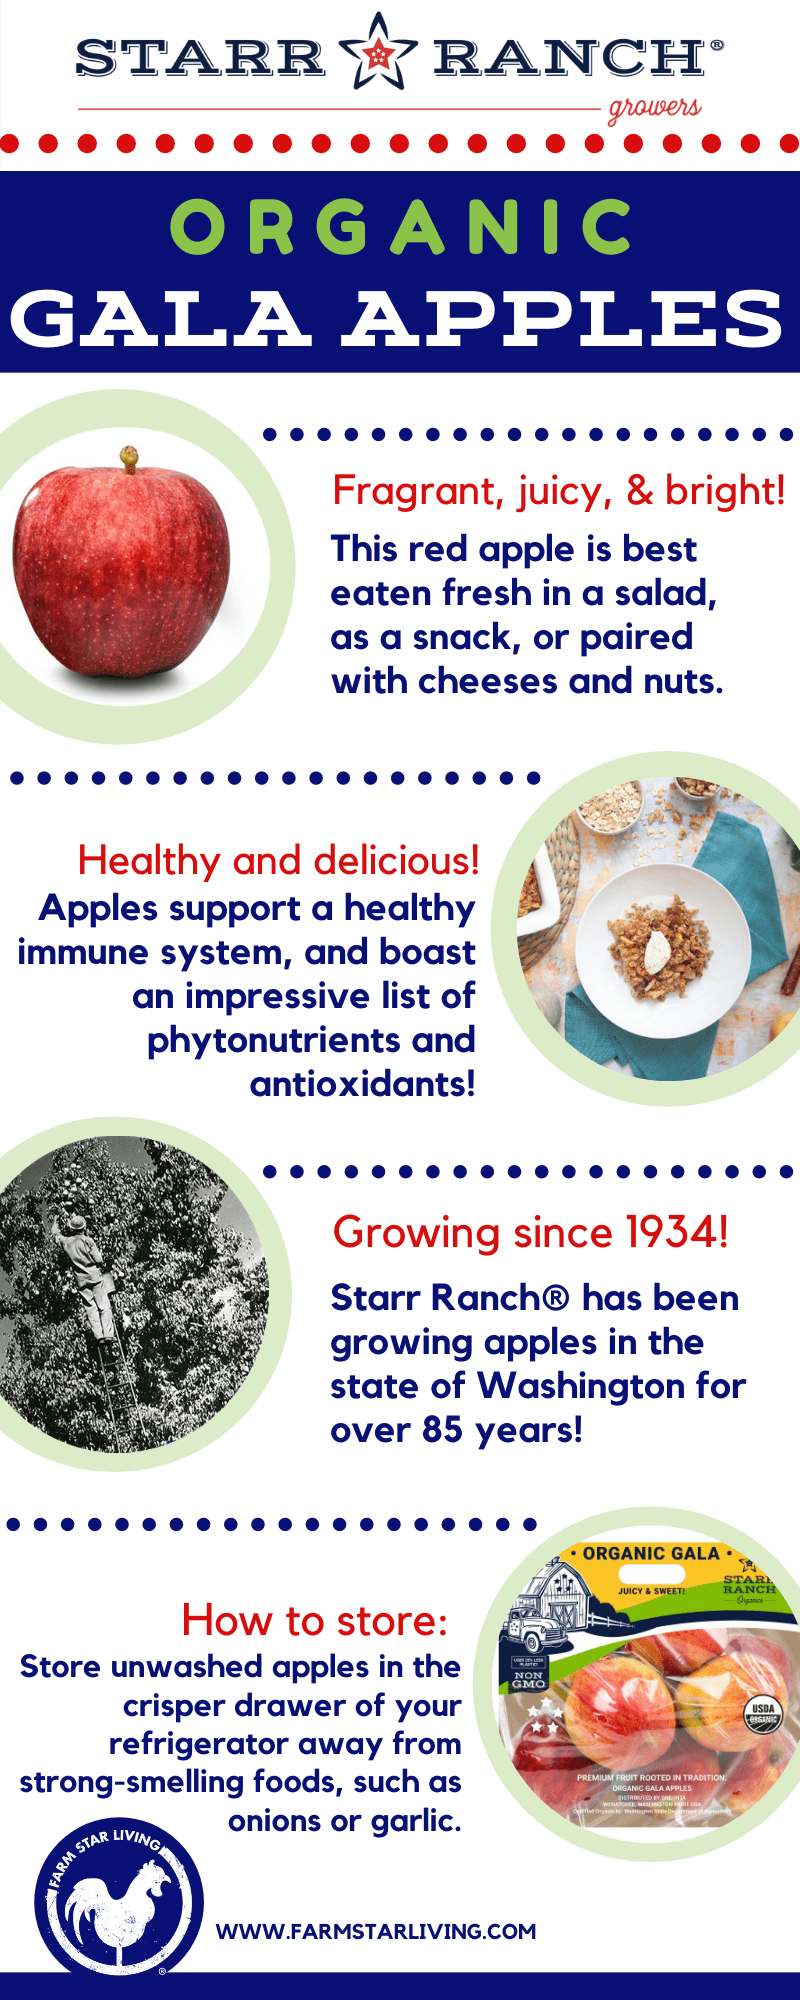 https://www.farmstarliving.com/wp-content/uploads/2020/07/OrganicGalaApplesInfographic.png